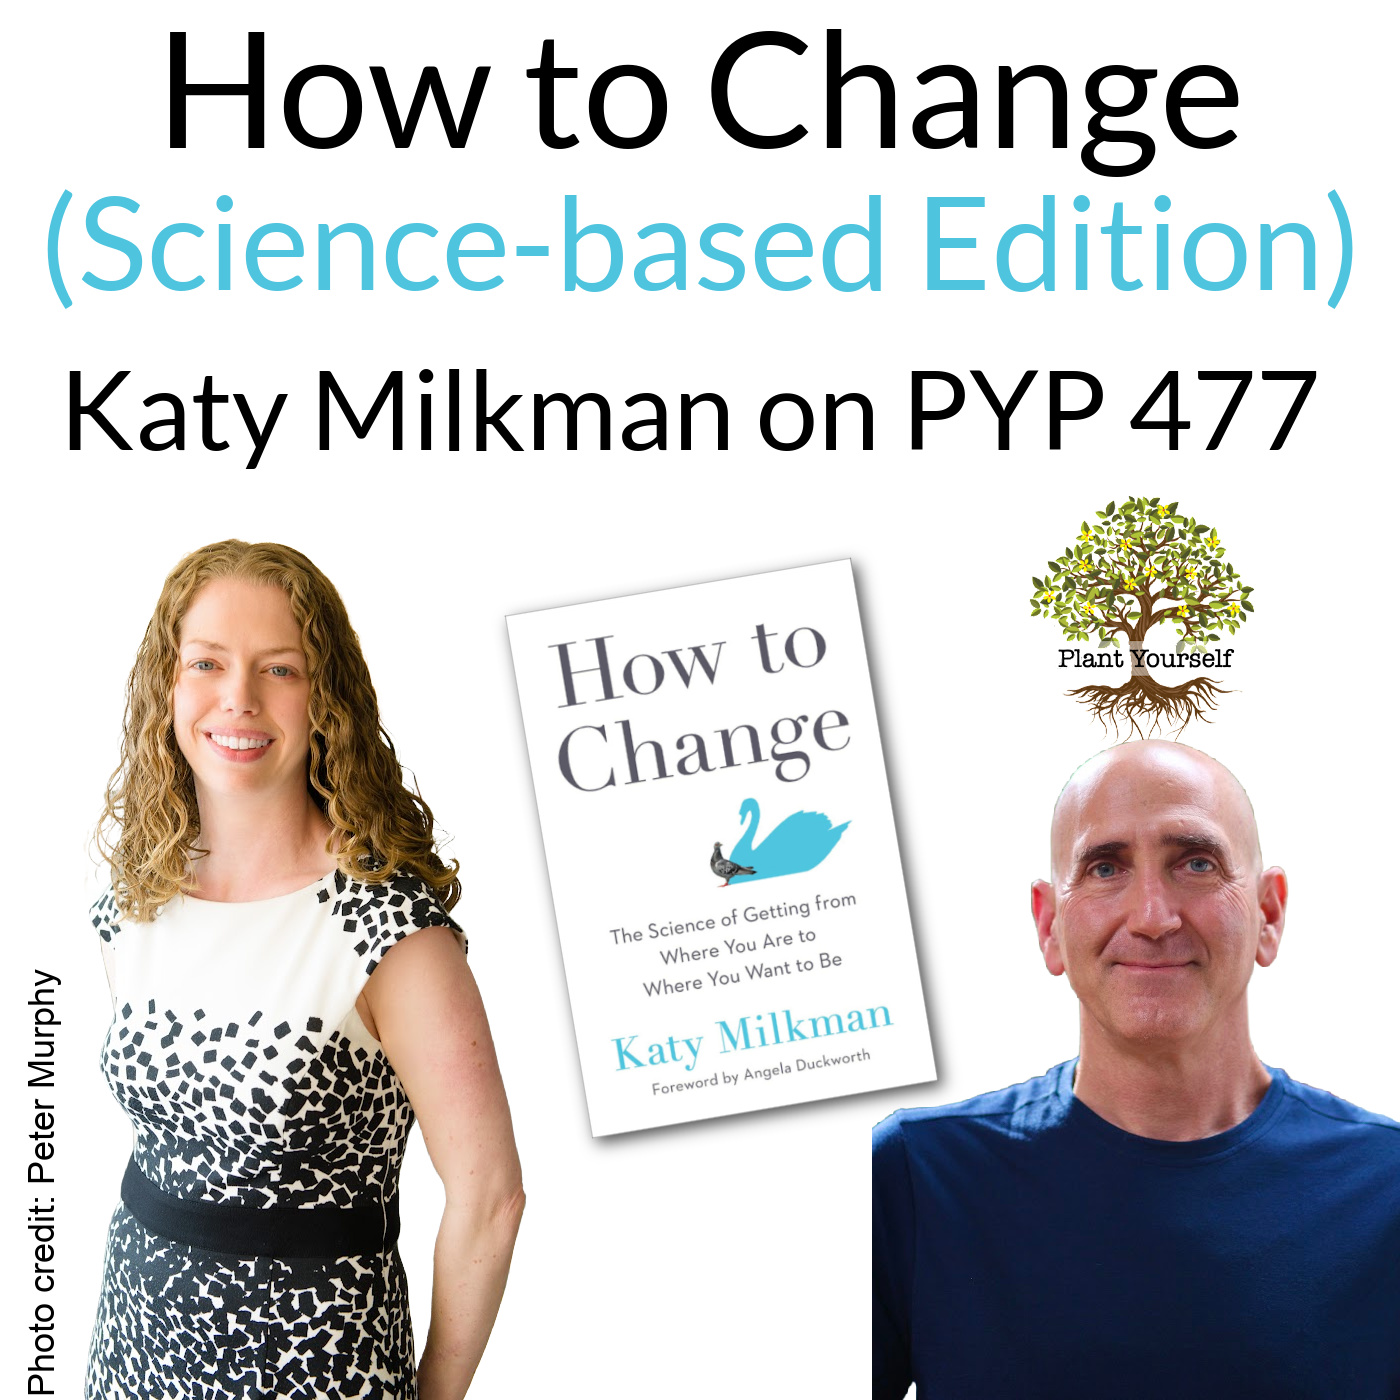 How to Change (Science-based Edition): Katy Milkman on PYP 477